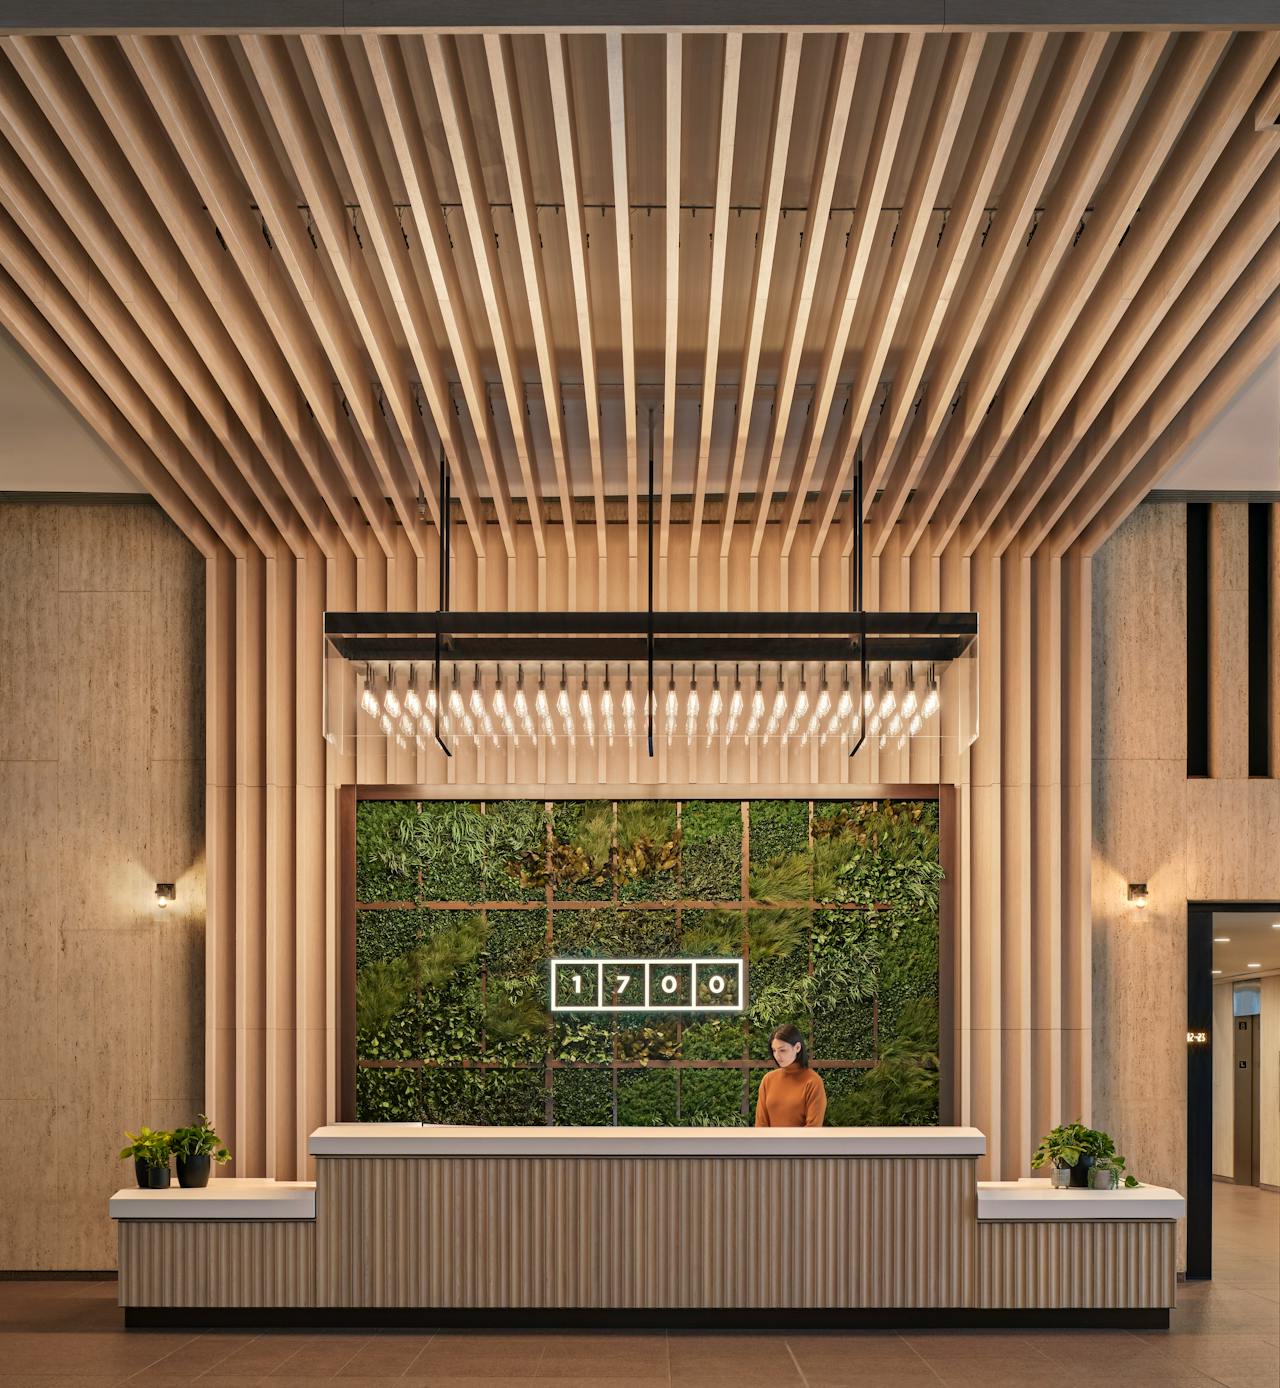 1700 lobby design with green elements & bronze detailing